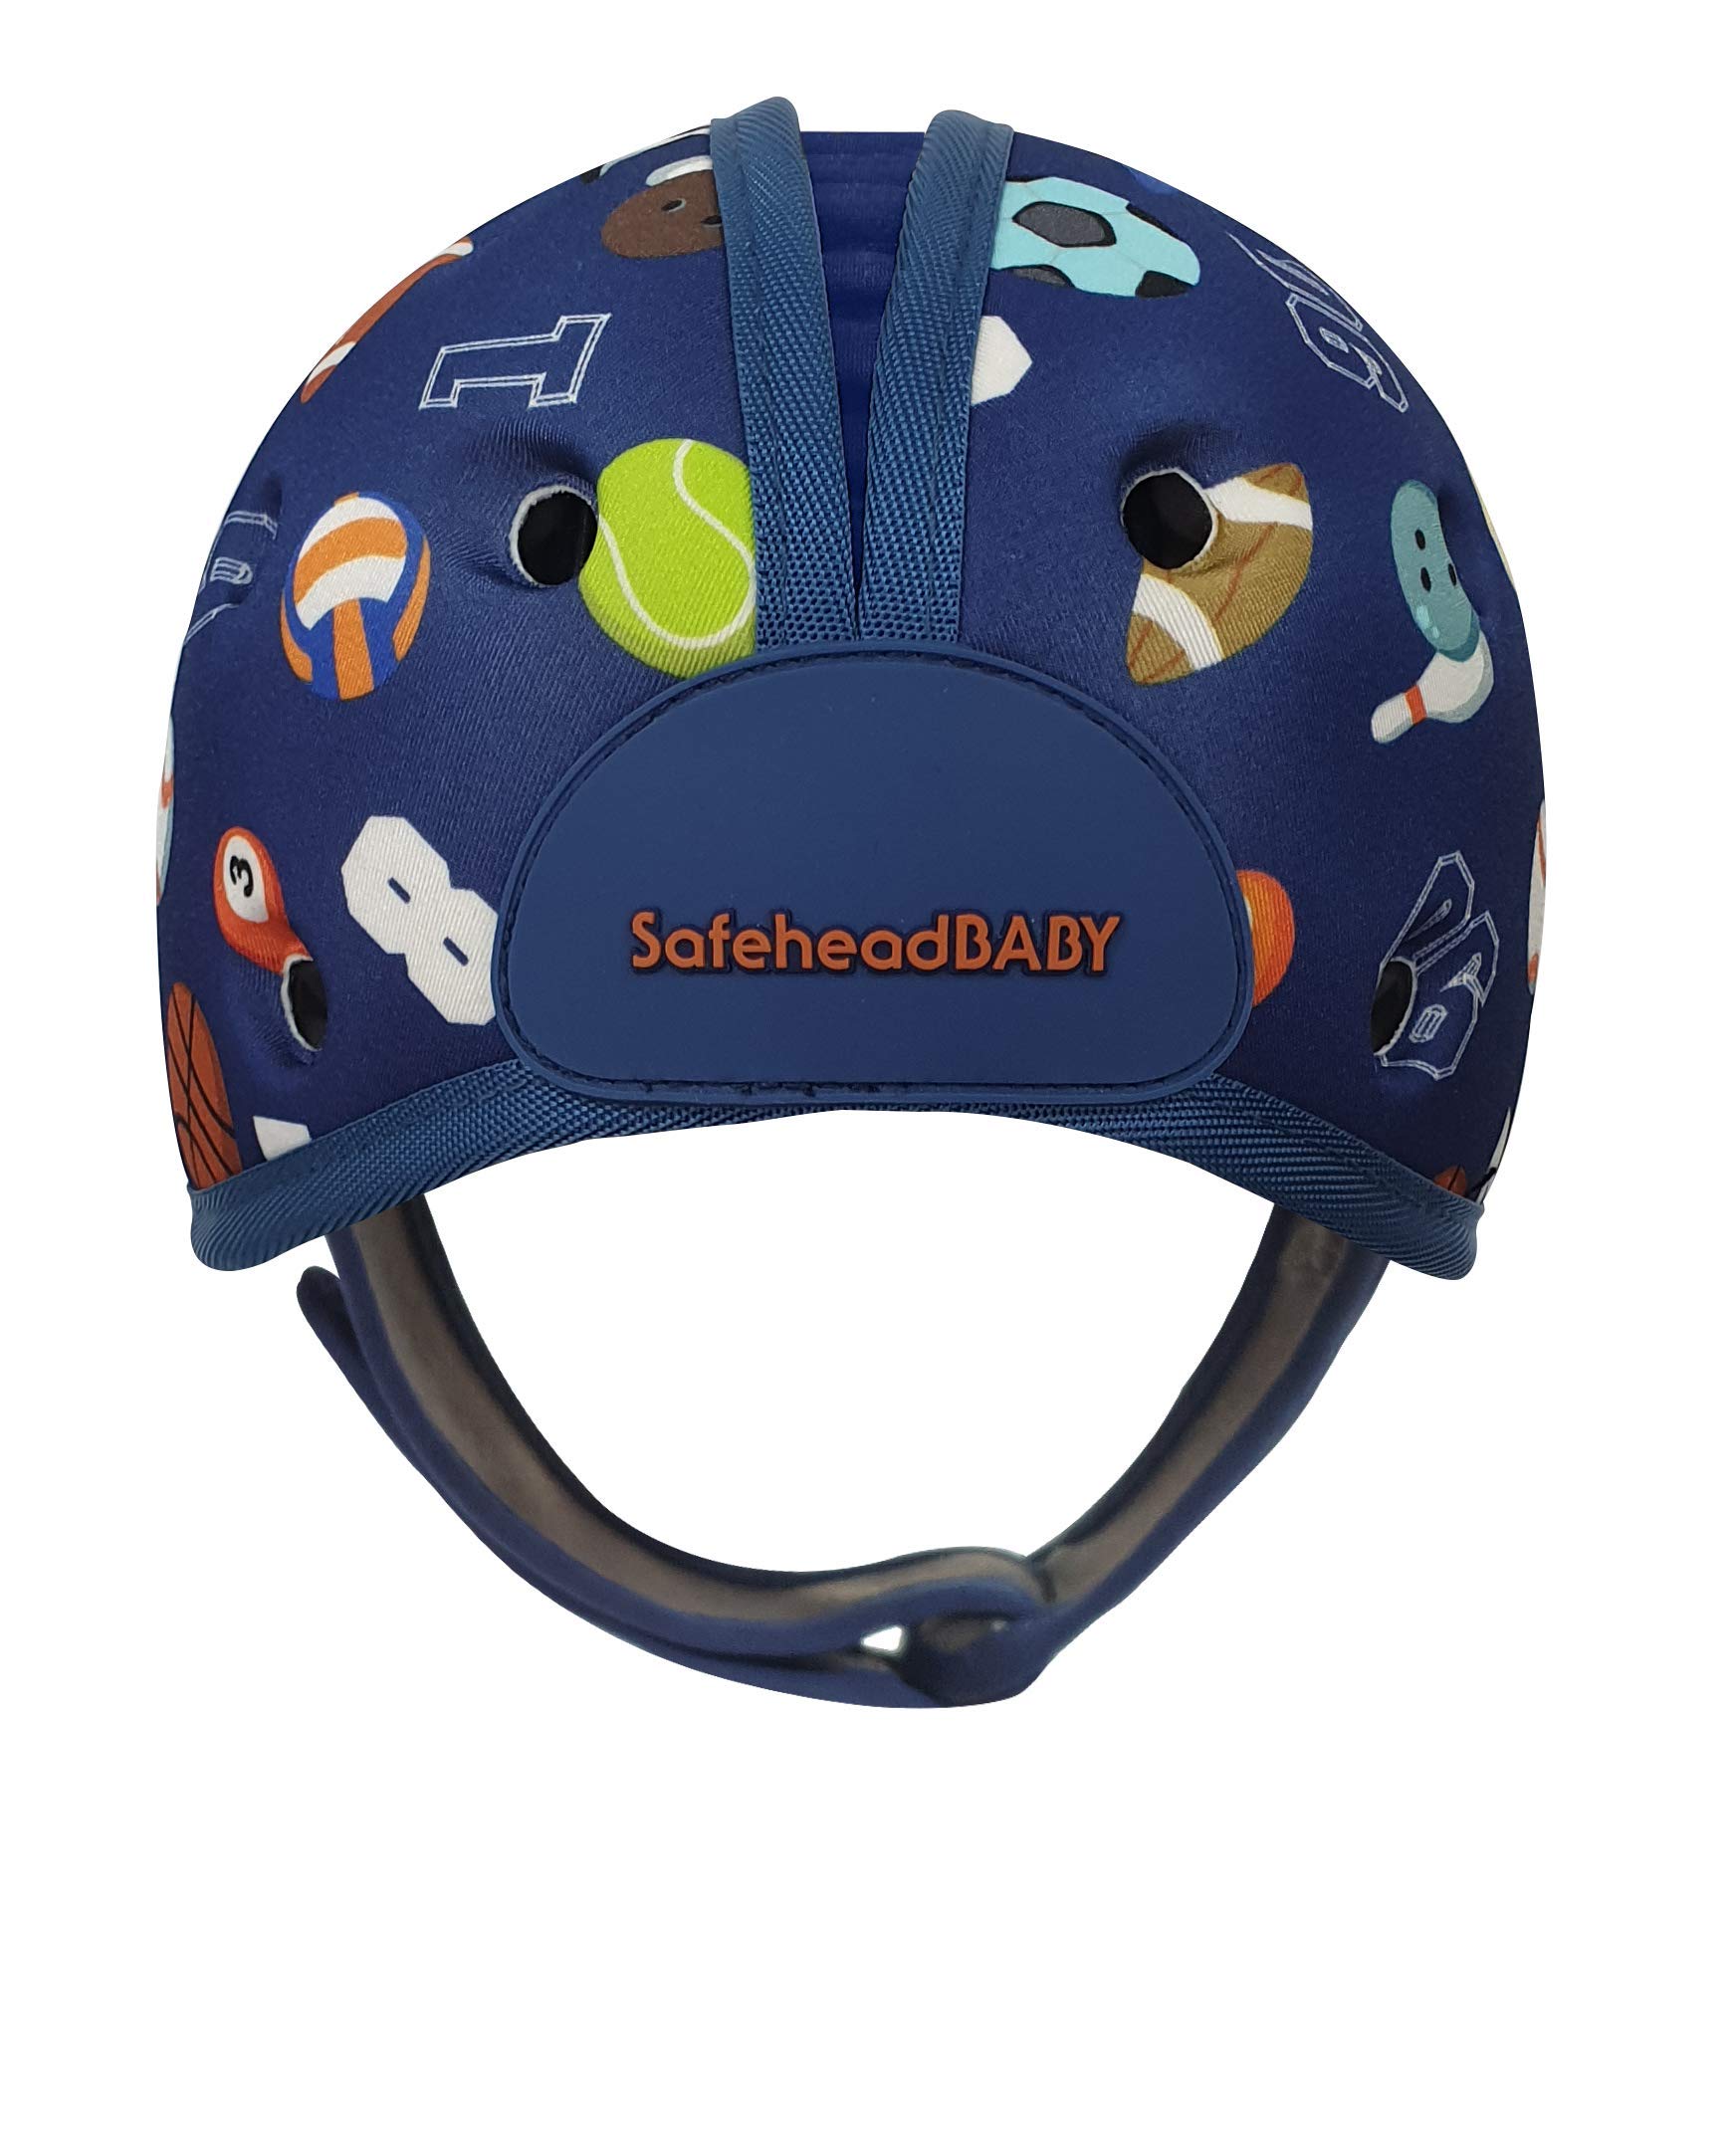 SafeheadBABY: Award-Winning Infant Safety Helmet, Baby Crawling and Walking Helmet, Toddler Head Protection, Expandable and Adju